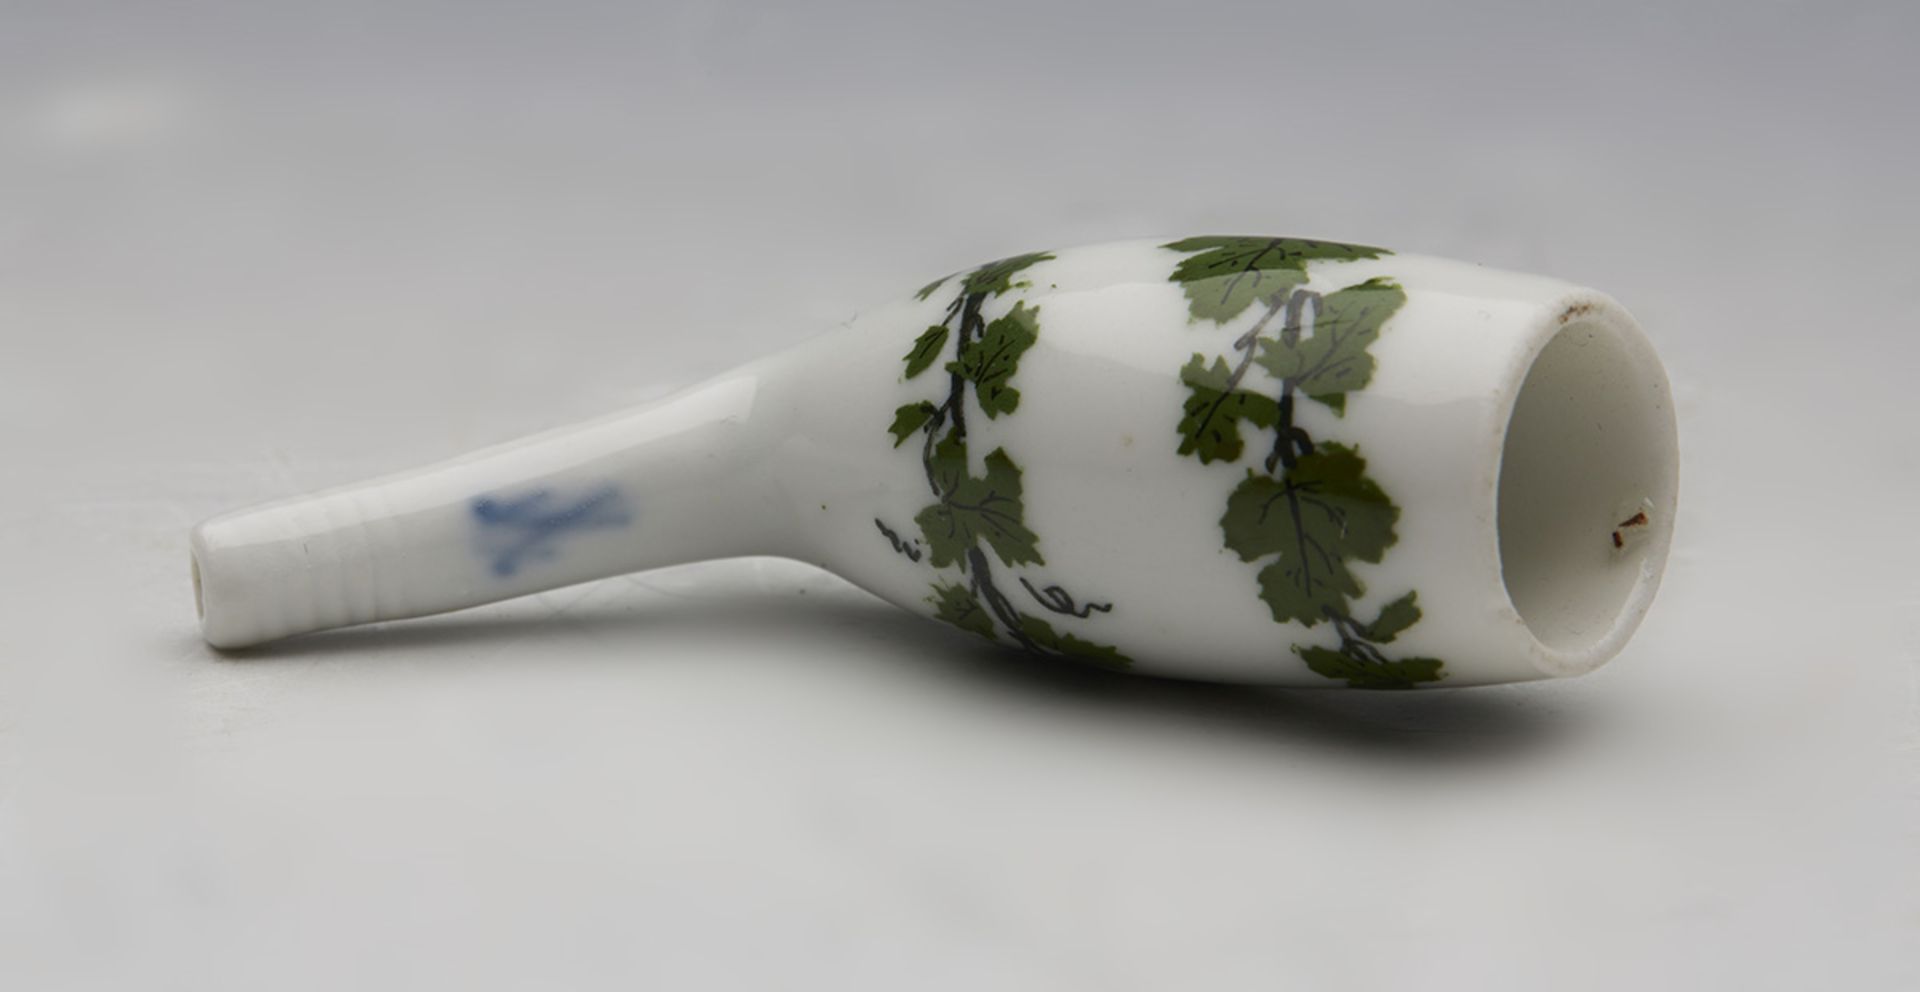 Antique German Meissen Porcelain Pipe Bowl With Ivy 19Th C. - Image 5 of 5